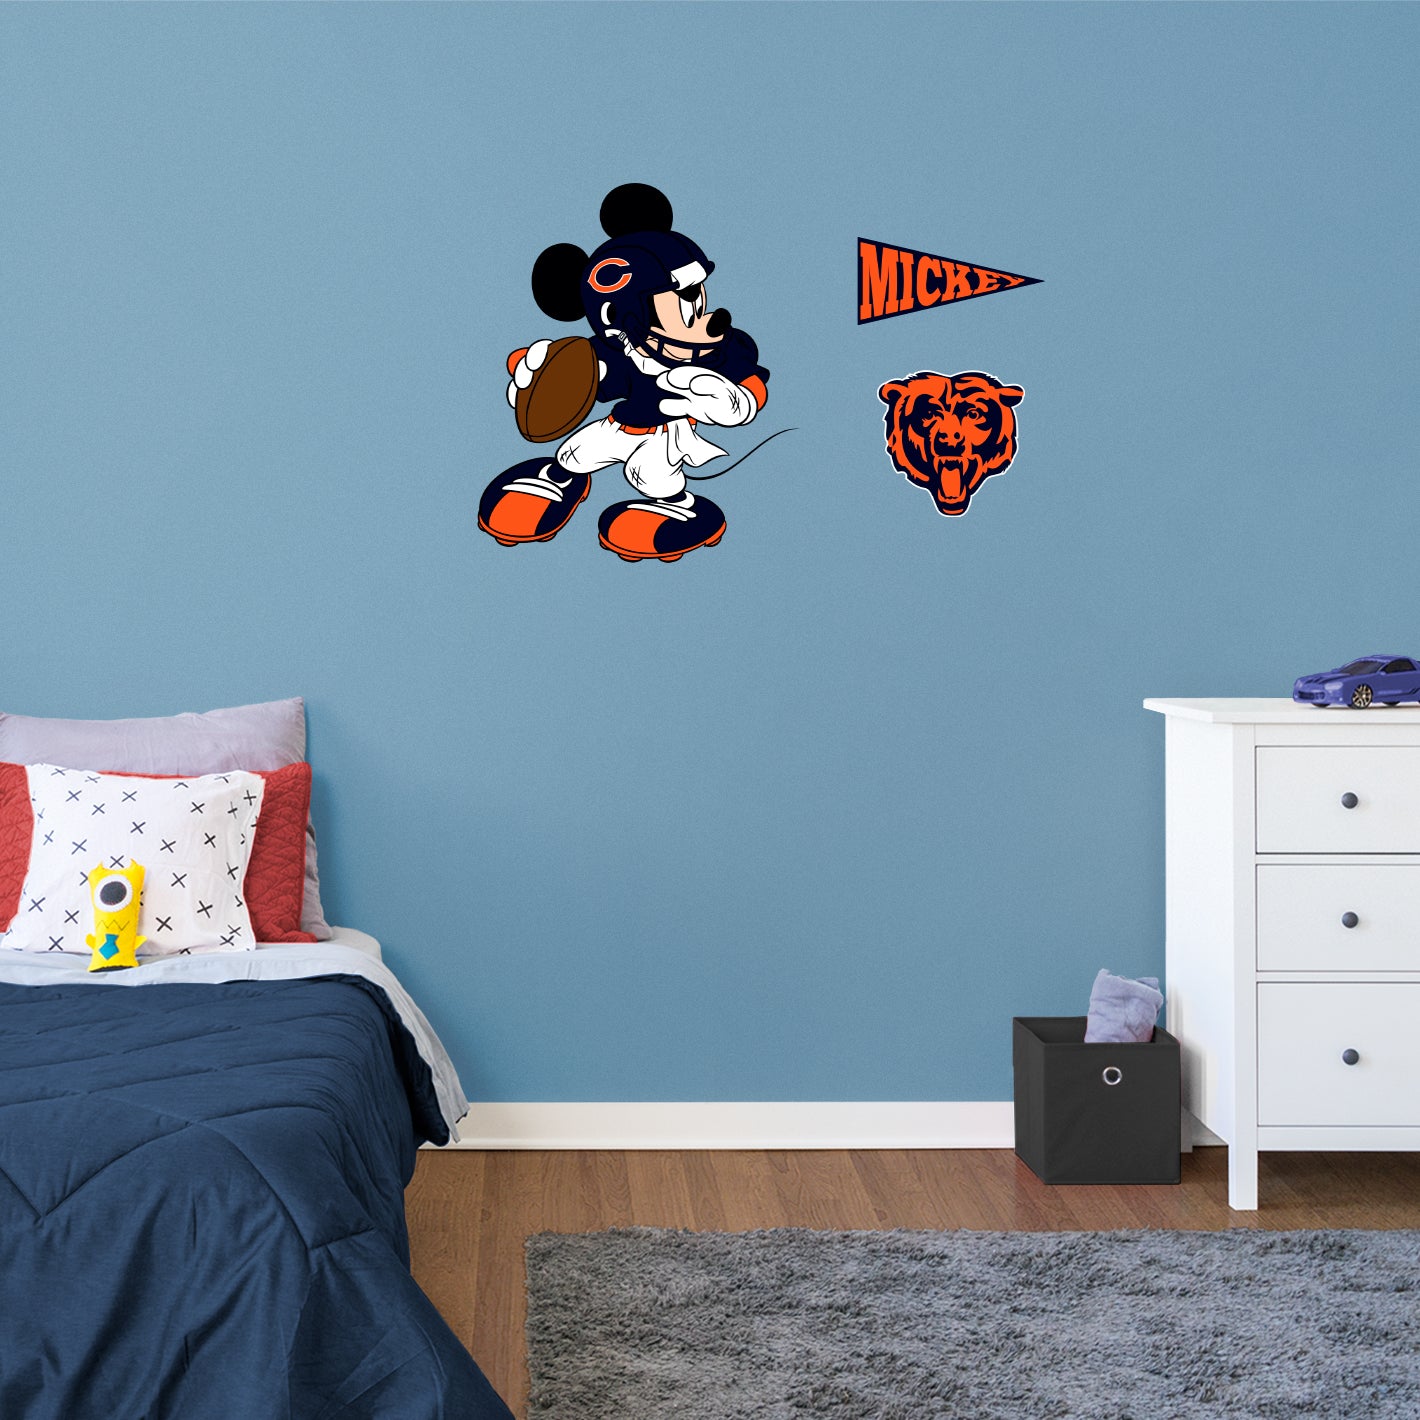 Chicago Bears: Mickey Mouse - Officially Licensed NFL Removable Adhesive Decal